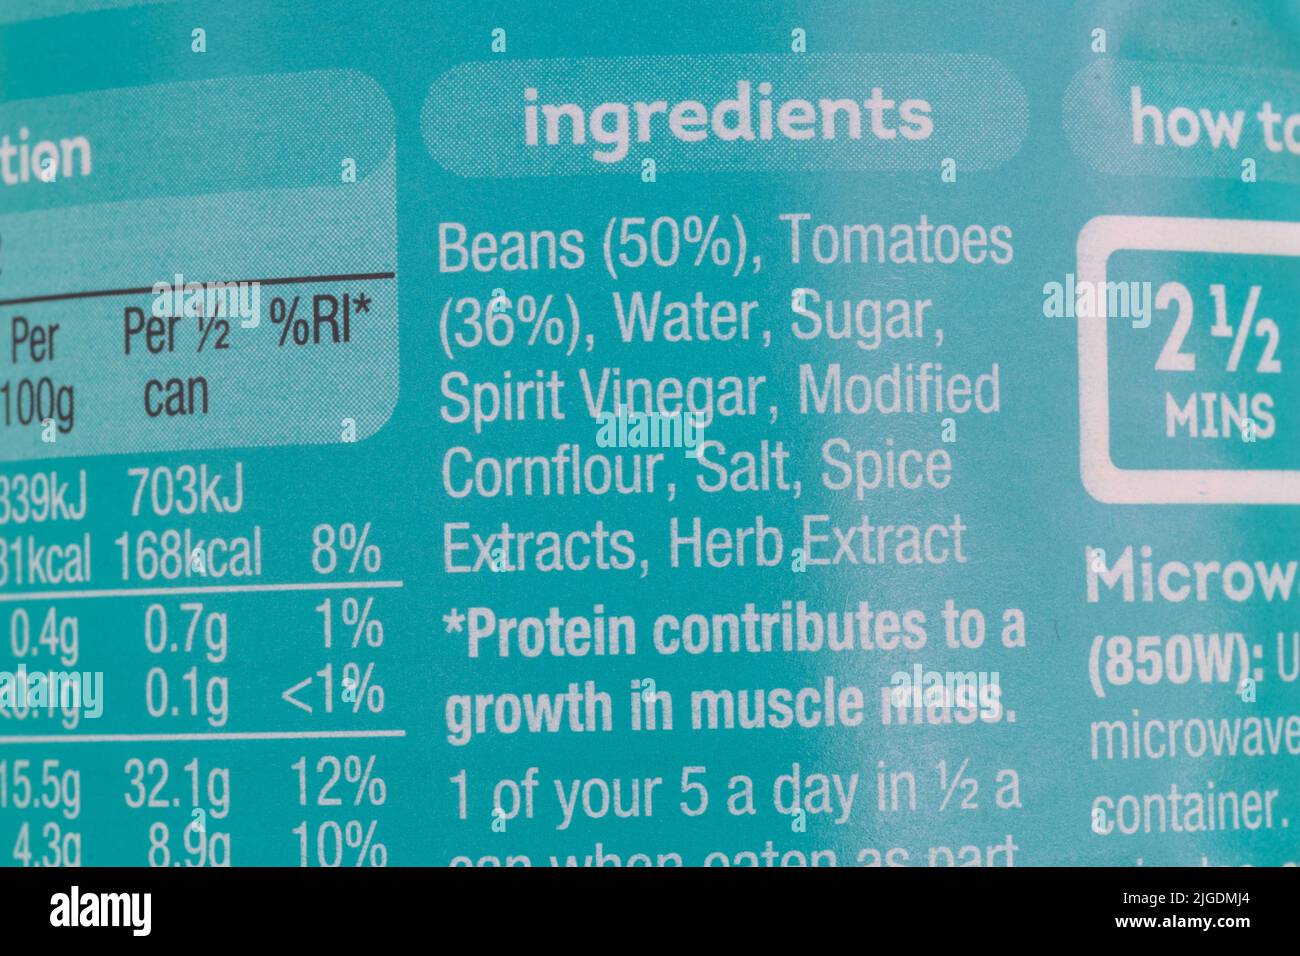 List of ingredients on tin of Heinz Beanz in a rich tomato sauce. Text 1 of your 5 a day. beans, tomatoes, water, sugar, cornflower, salt, herb, spice Stock Photo